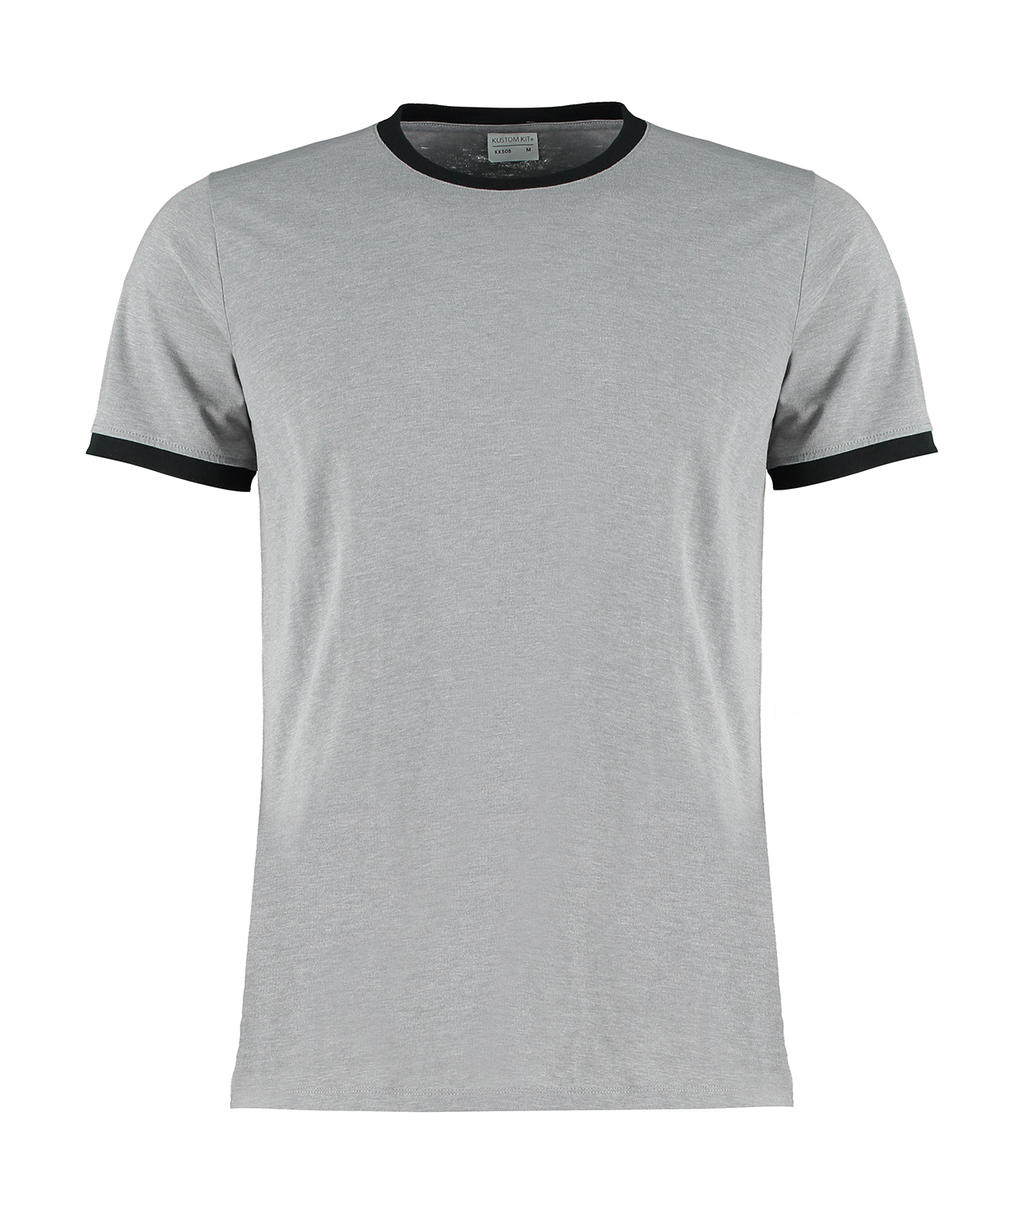  Fashion Fit Ringer Tee in Farbe Light Grey Marl/Black